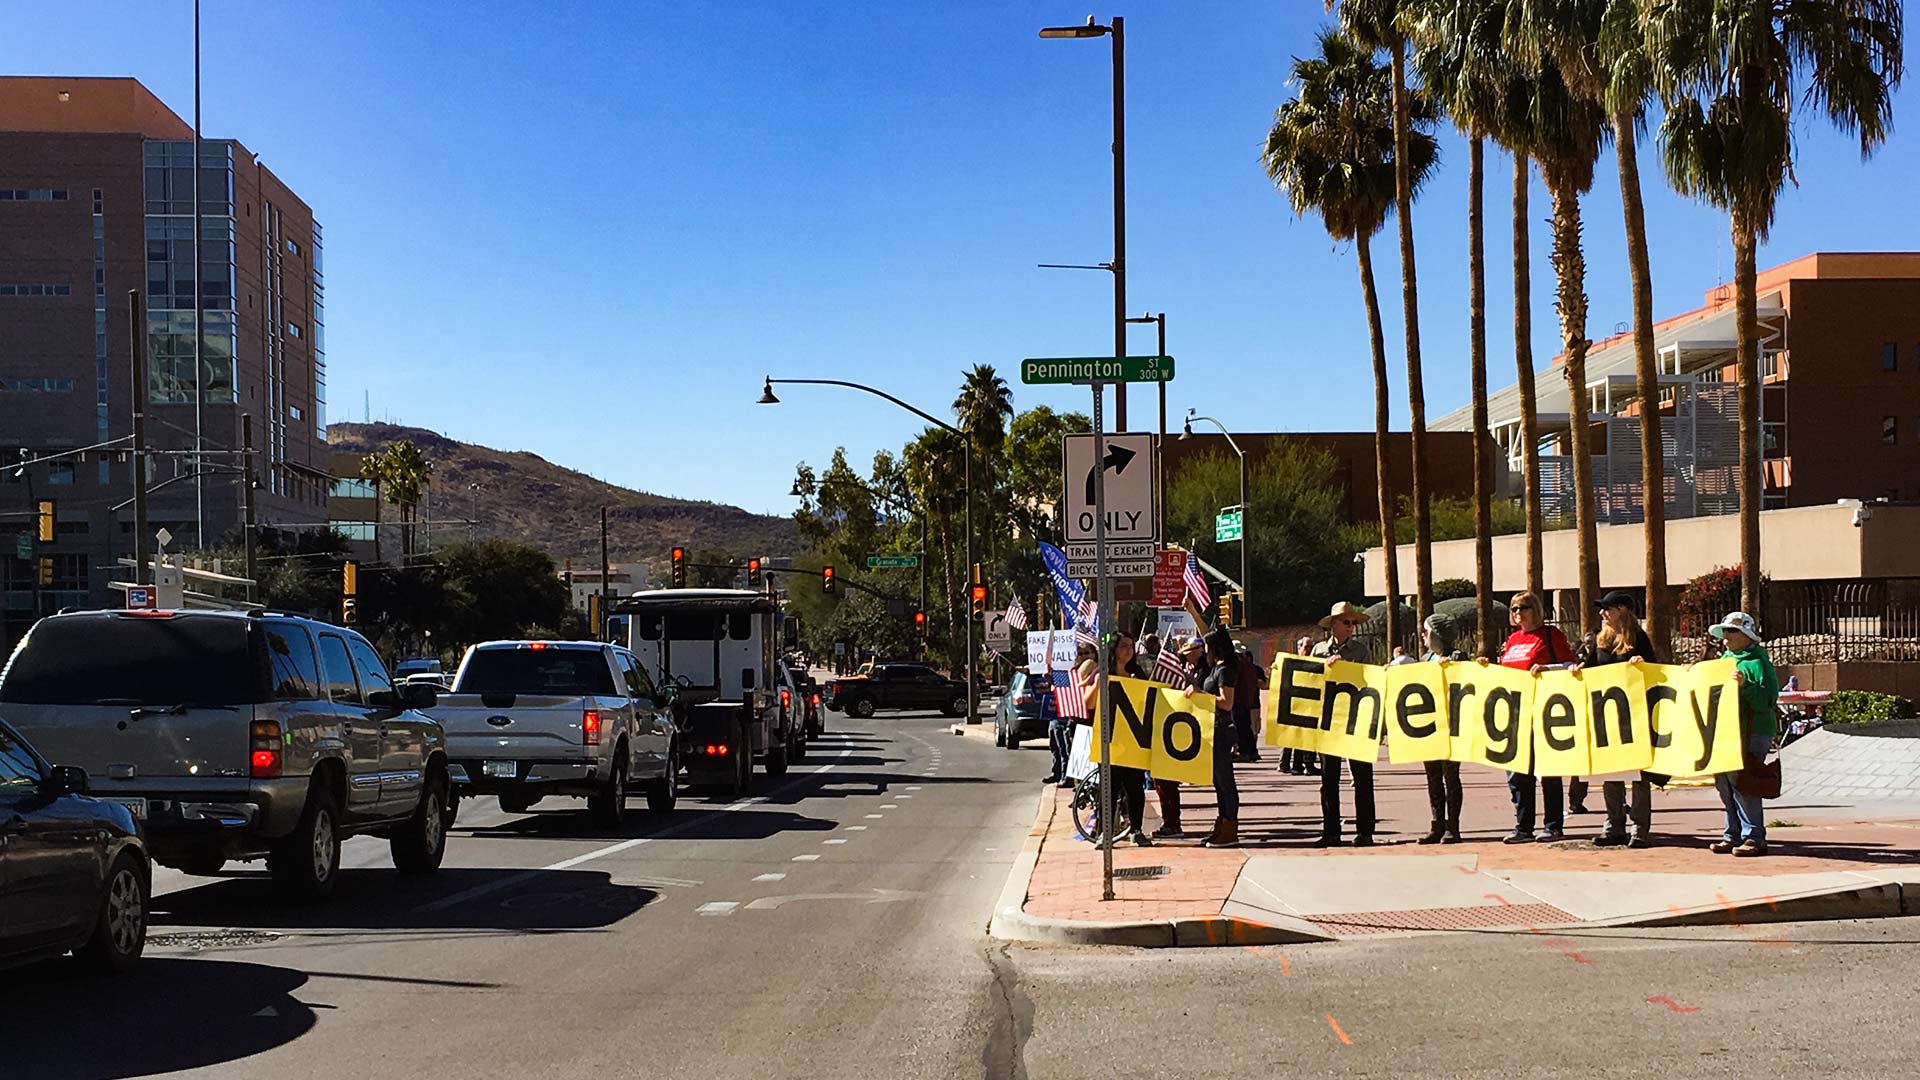 Demonstrators gathered in downtown Tucson to protest the government shutdown, Jan. 25, 2019.